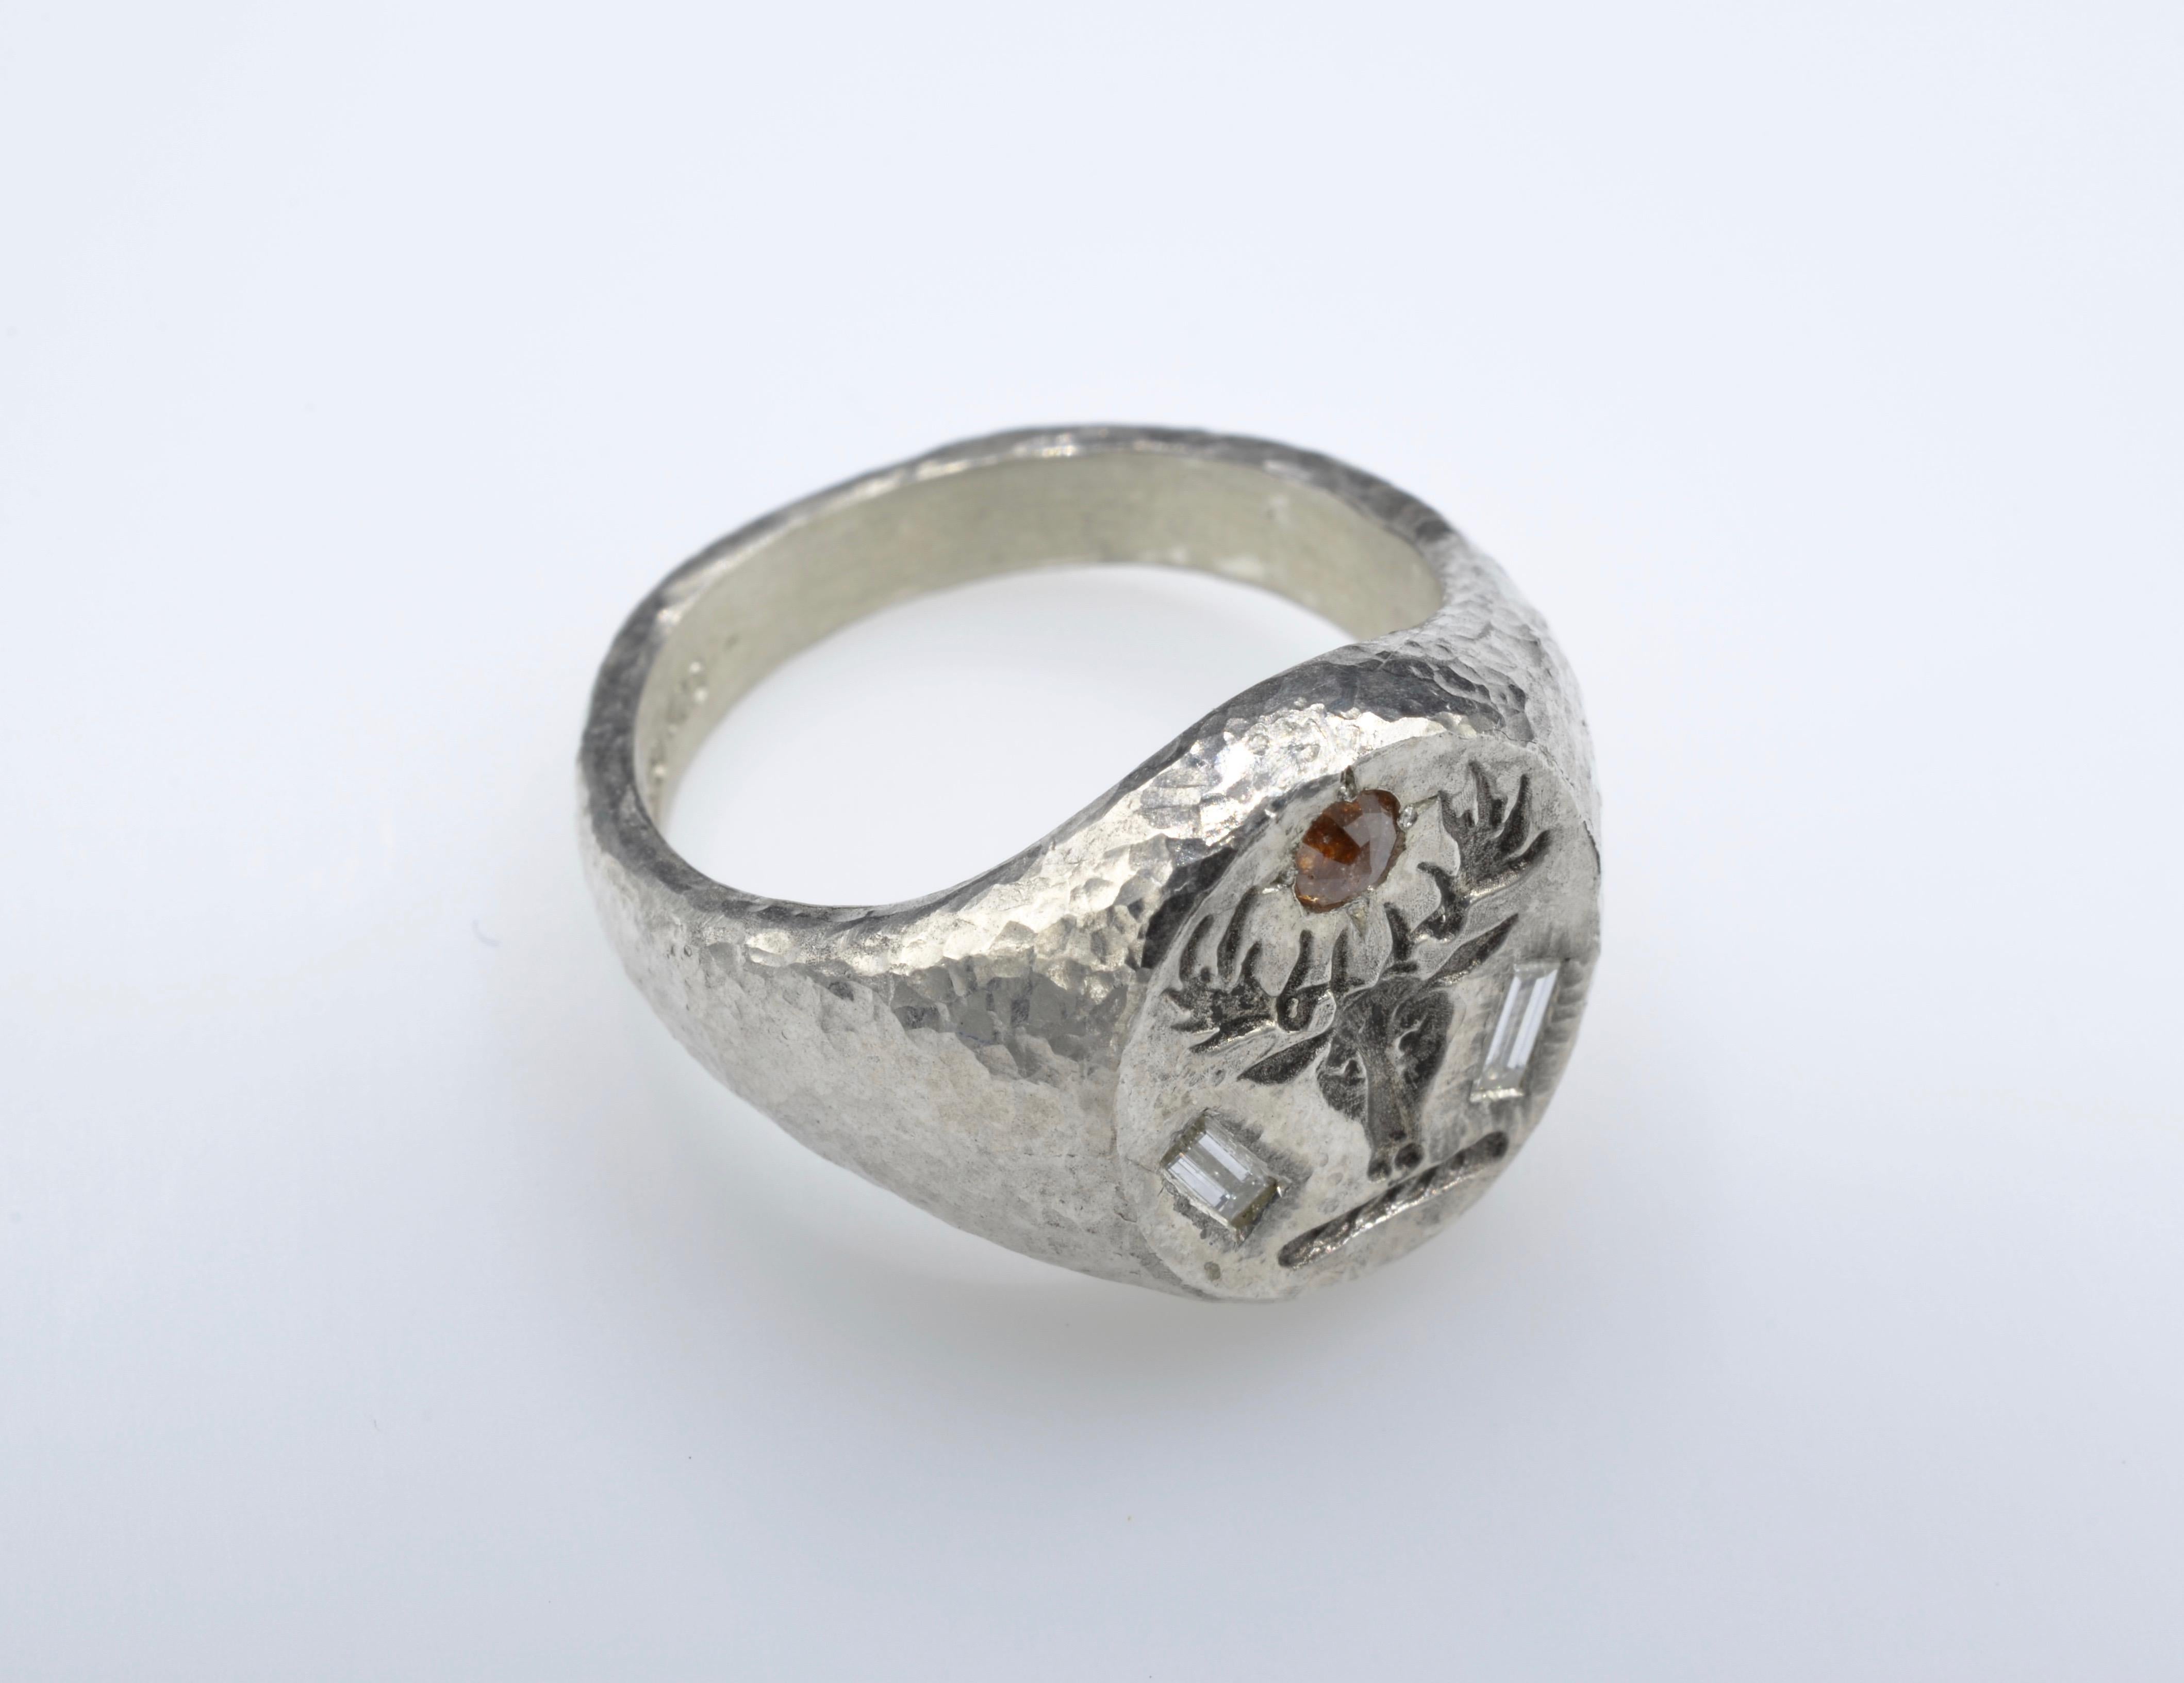 Traditional shape of a signet ring, with the particularity of the hammered texture in silver and set with diamonds. The two baguettes diamonds are 0.10 carats each on the side of the Deer head that adds a modern look to the ring. The top is showing